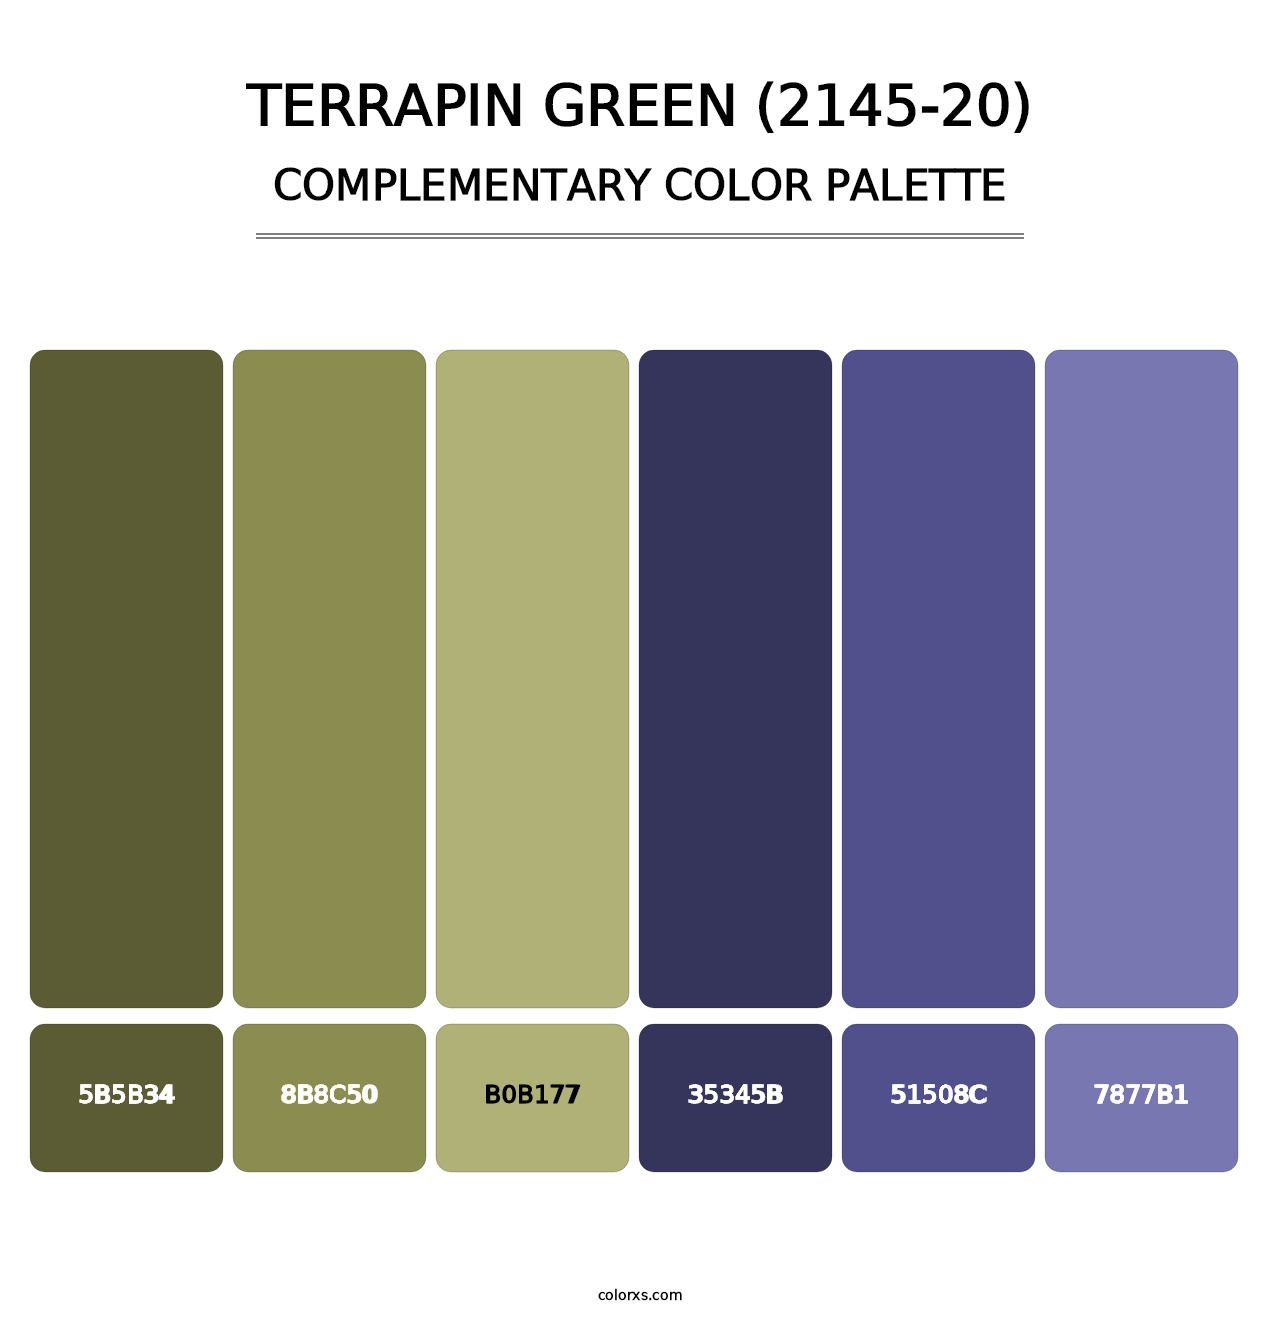 Terrapin Green (2145-20) - Complementary Color Palette